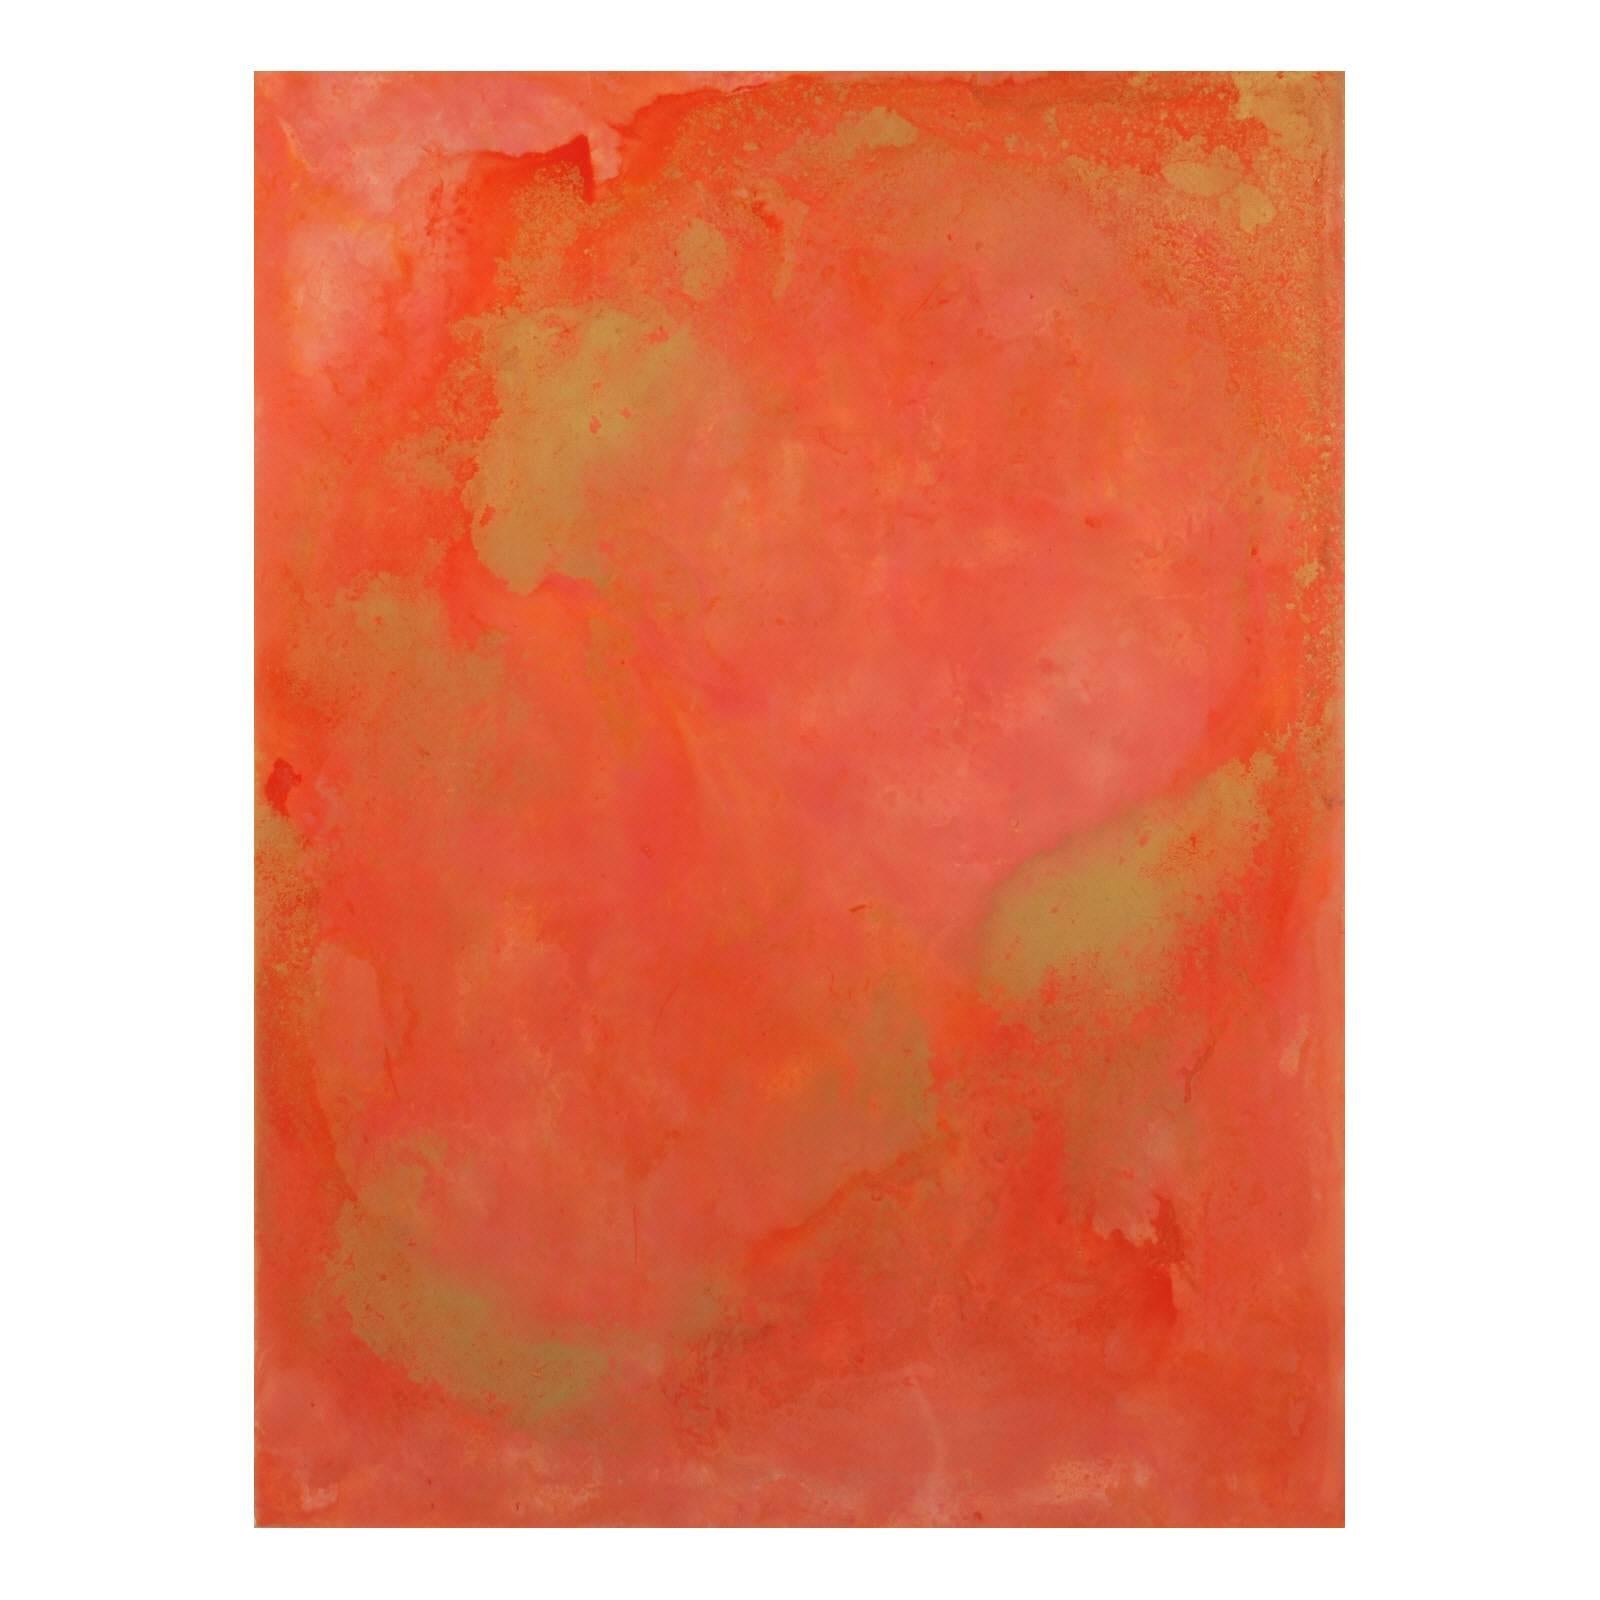 Titled “Bennie Jean”, this striking abstract painting is filled with color tones of coral and salmon, with highlights of metallic gold. Finished in a high gloss resin, this mixed media artwork would make a statement in any room or office. The